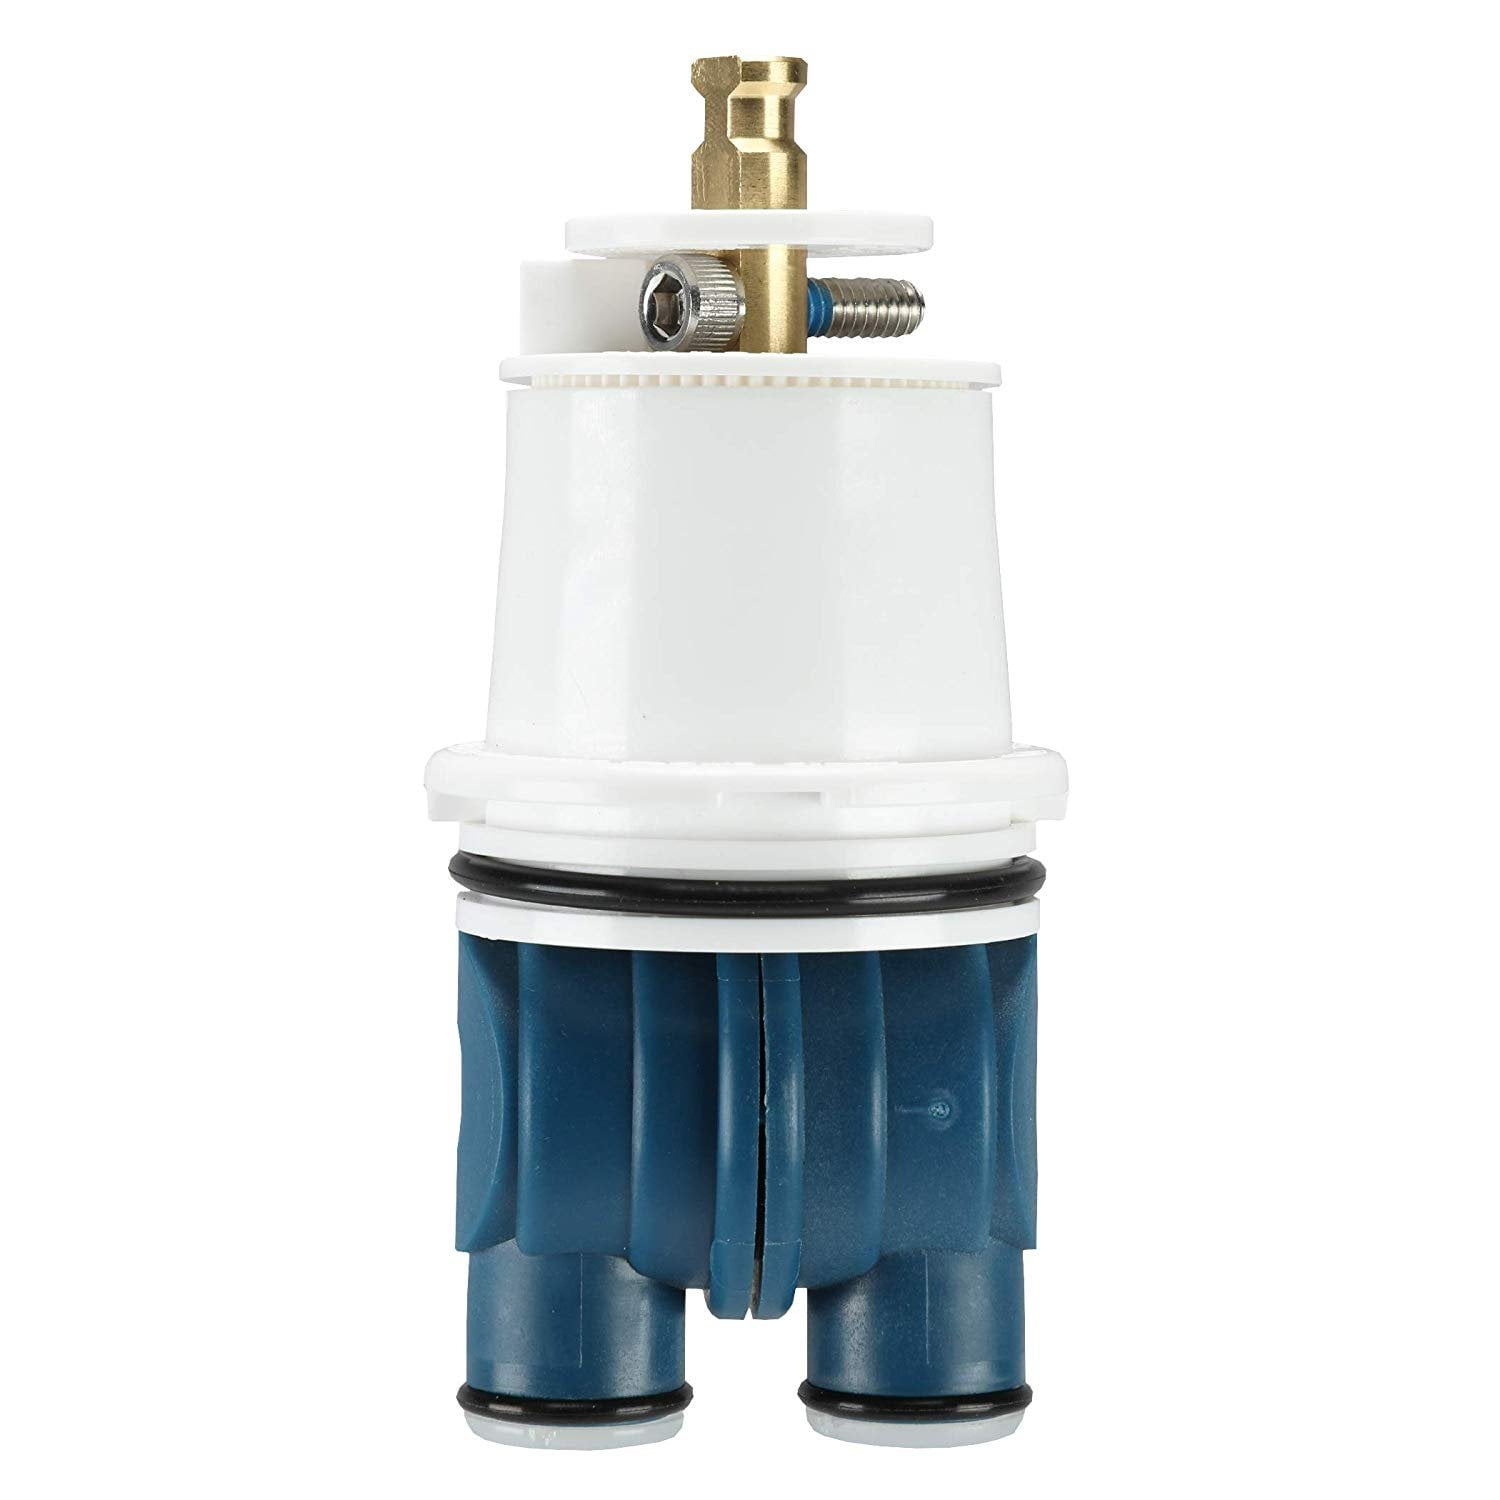 Delta Monitor Shower Valve Cartridge, How To Fix A Leaky Bathtub Faucet Delta Shower Cartridge